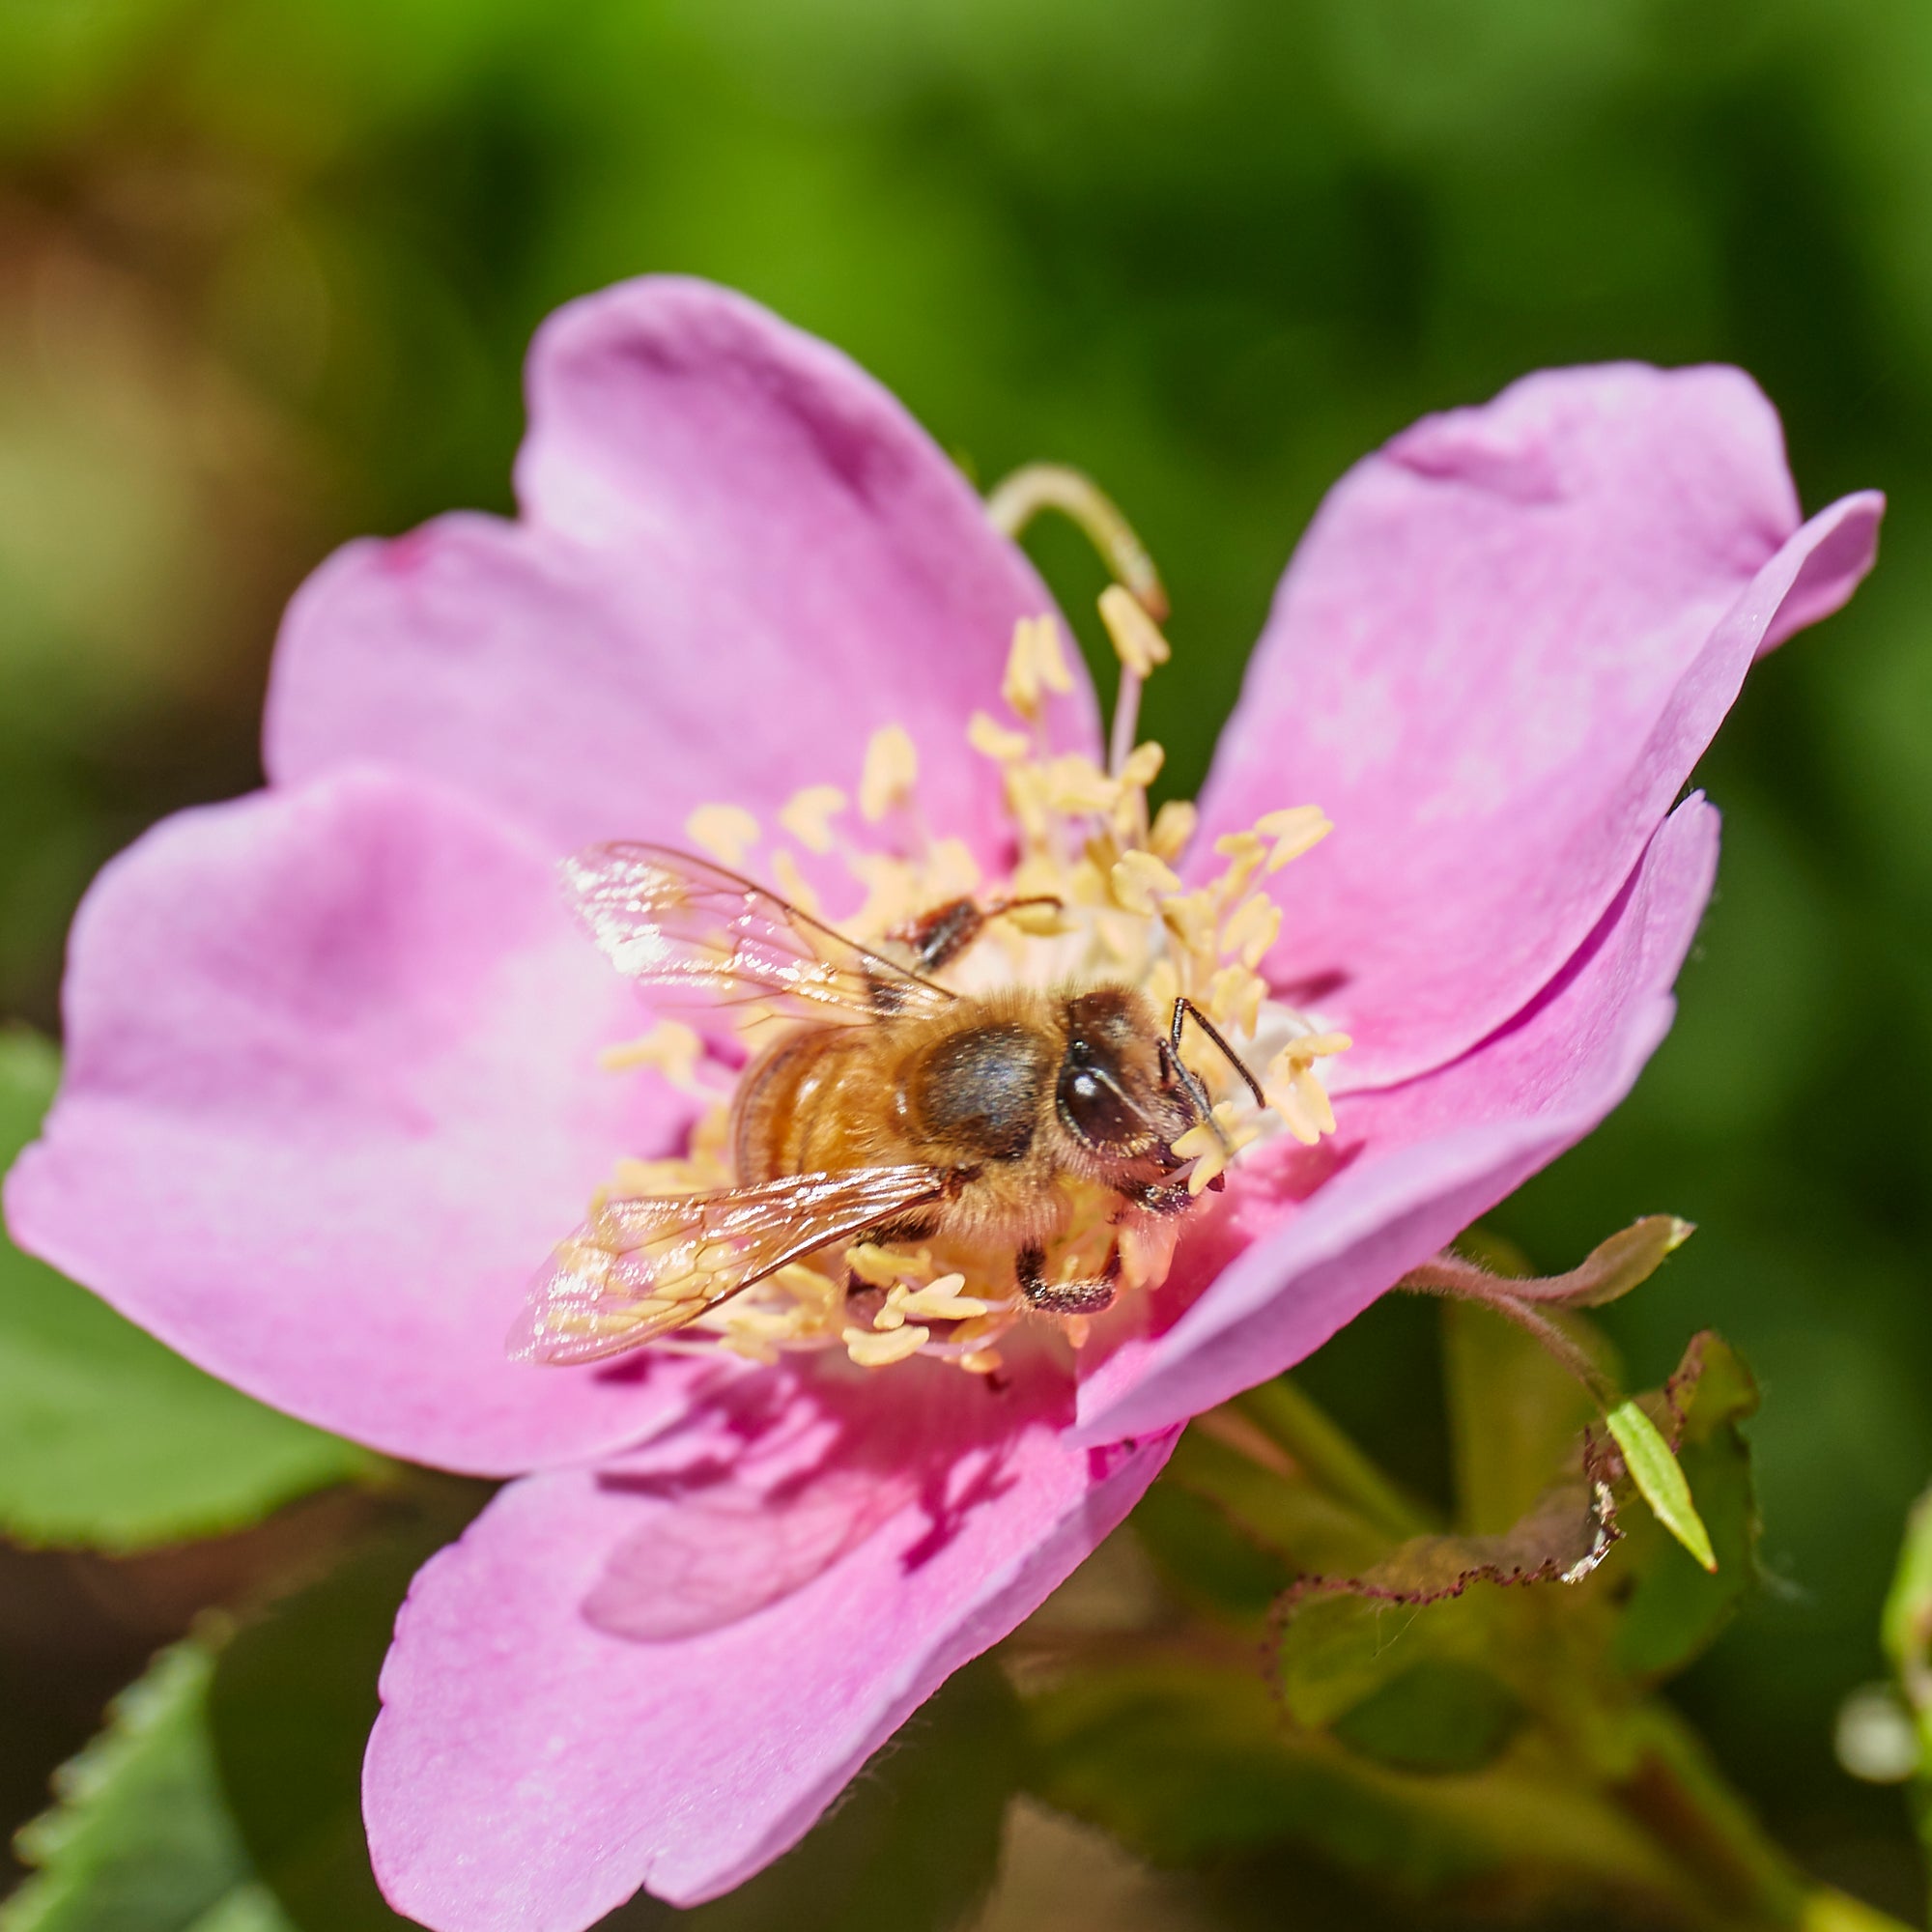 A light pink flower with yellow stamens in the center. A bee is in the center of the flower collecting pollen. The flower has thin, delicate petals.